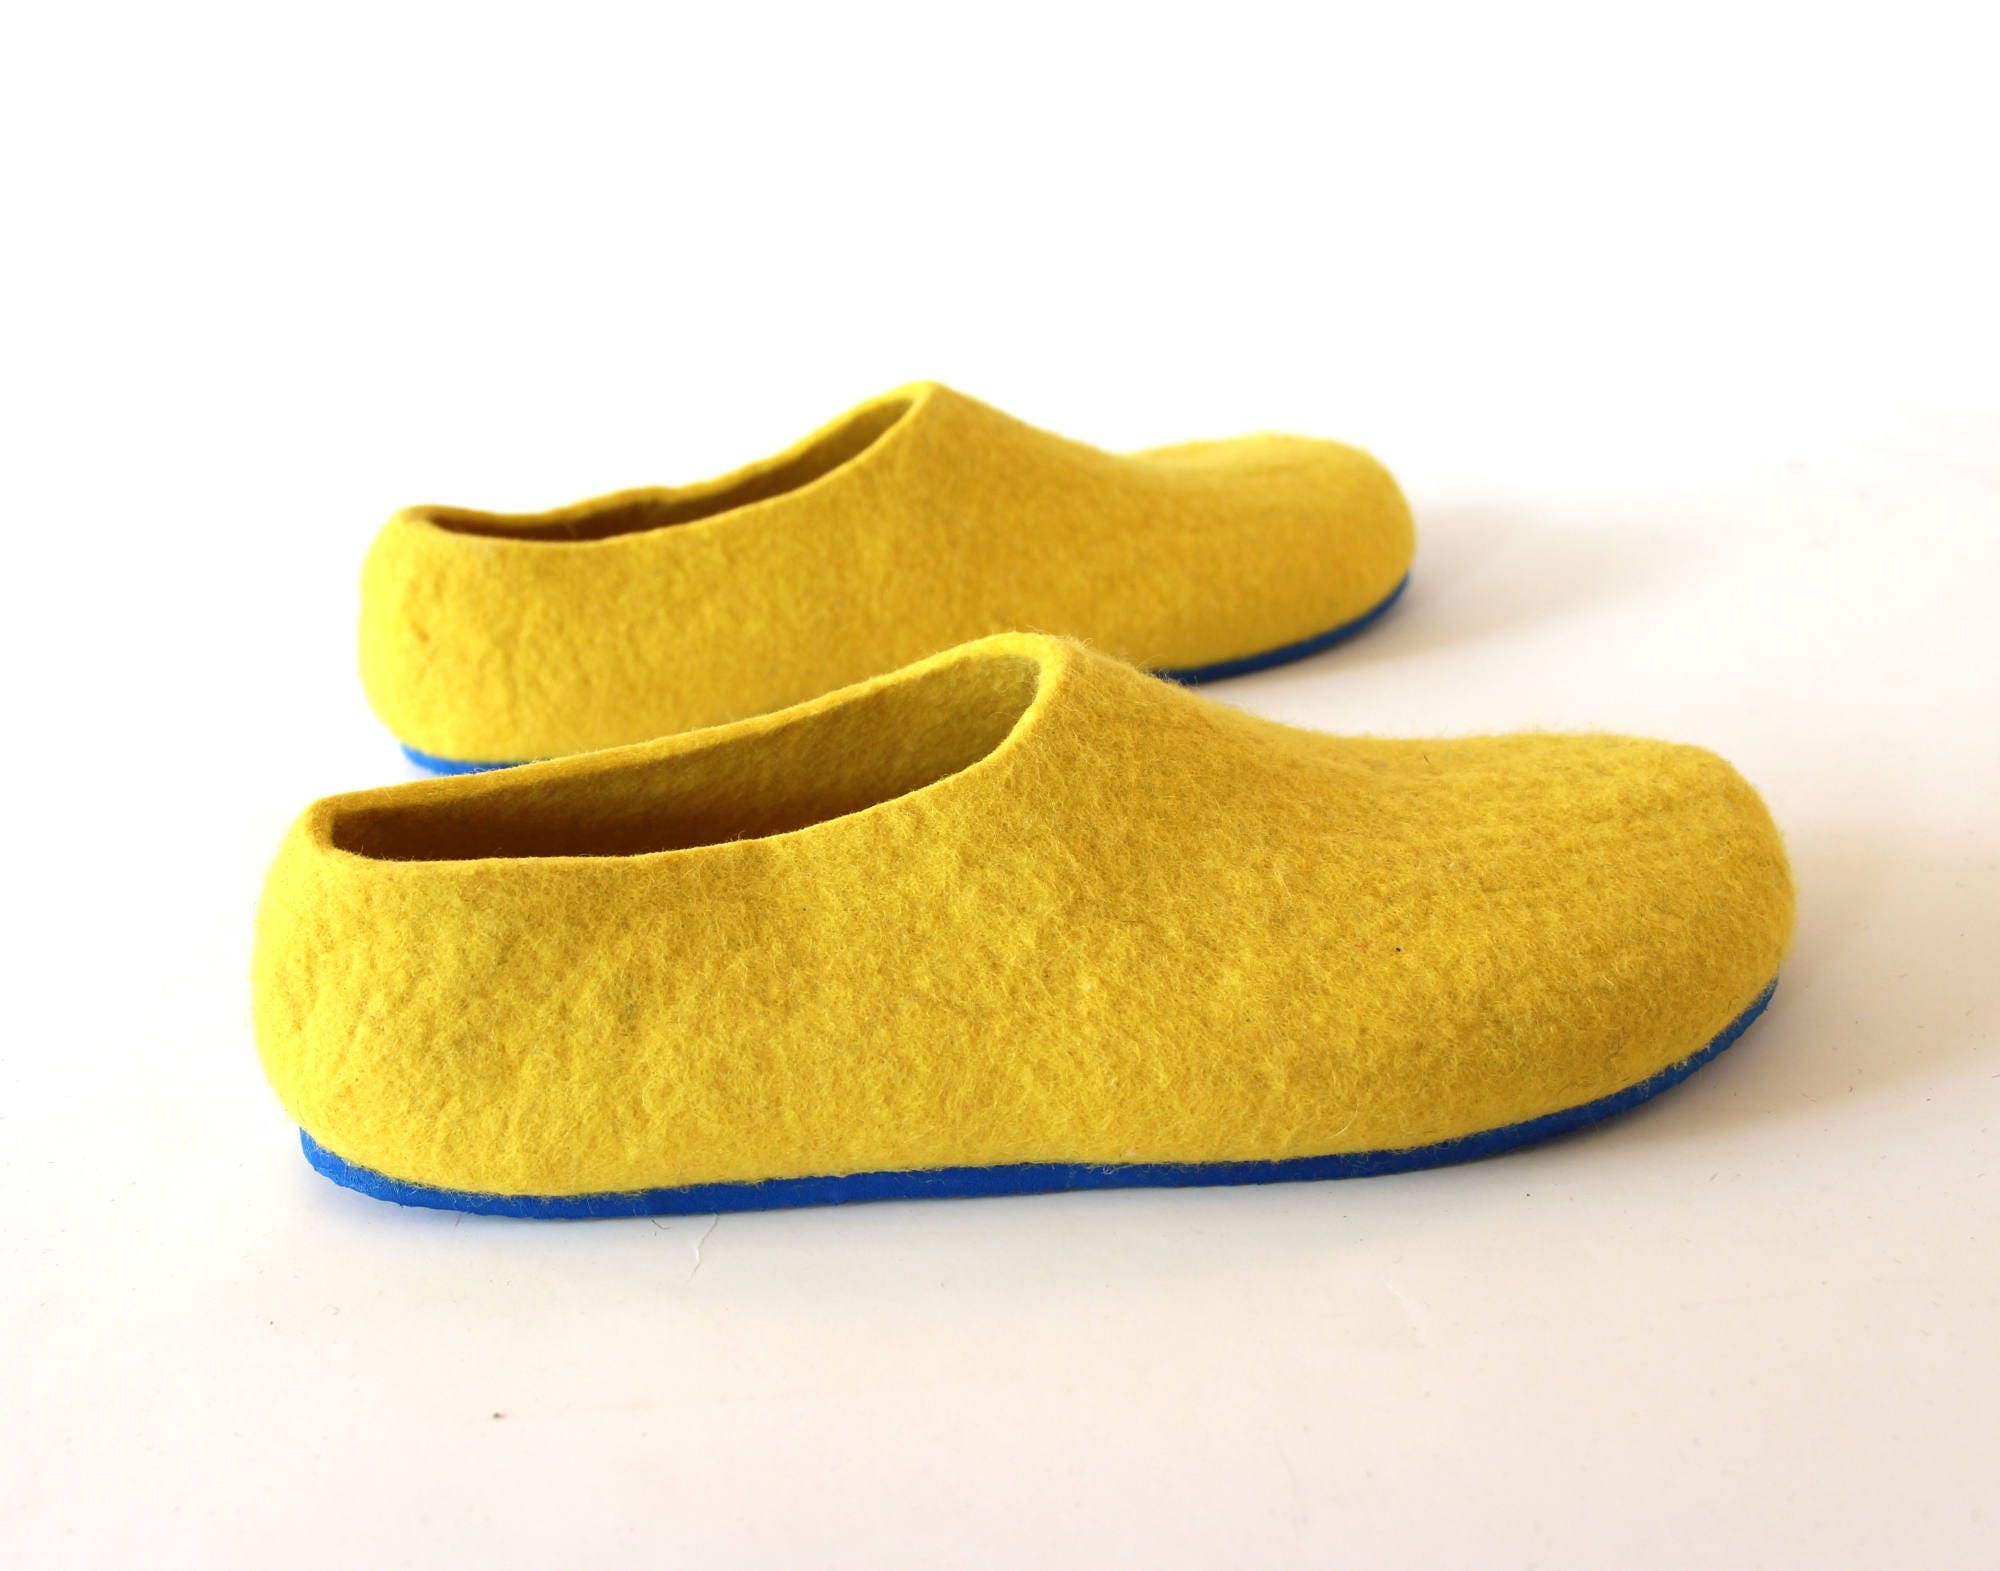 Yellow women clogs Boiled wool slippers Felt house shoes | Etsy